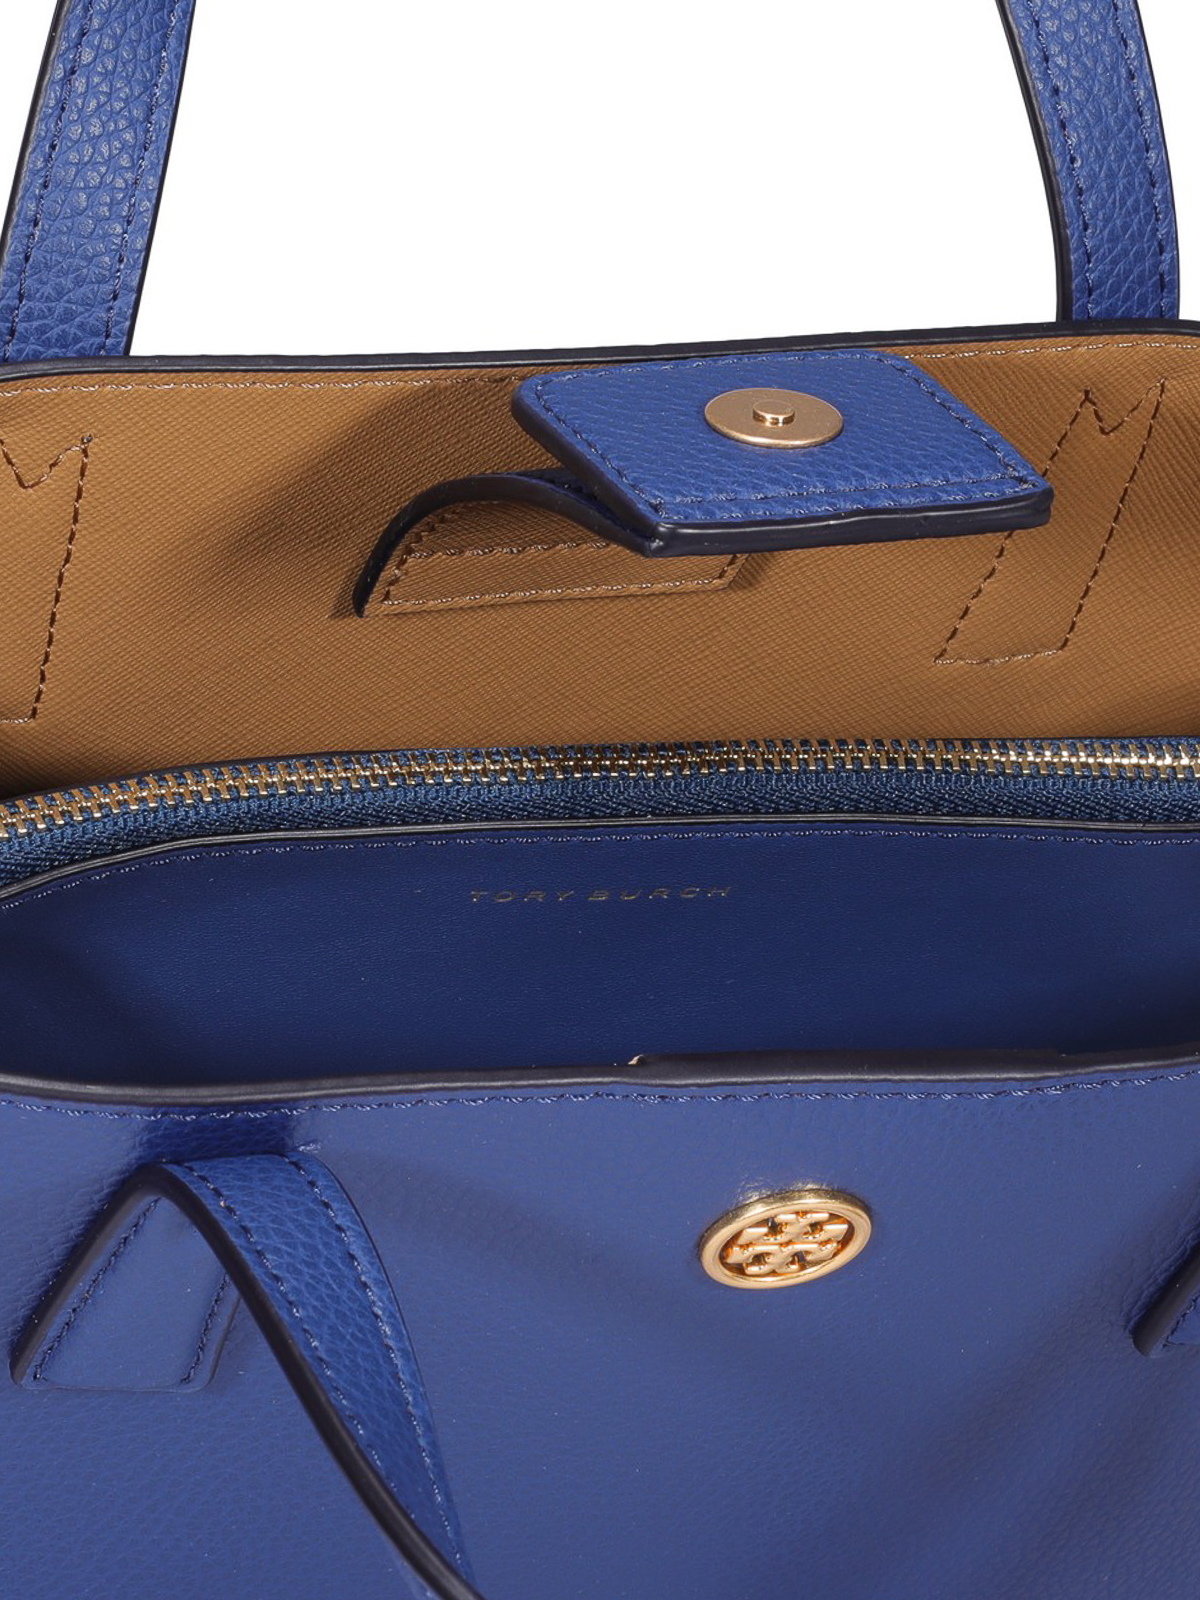 Tory Burch Blue and green Tote Bag.